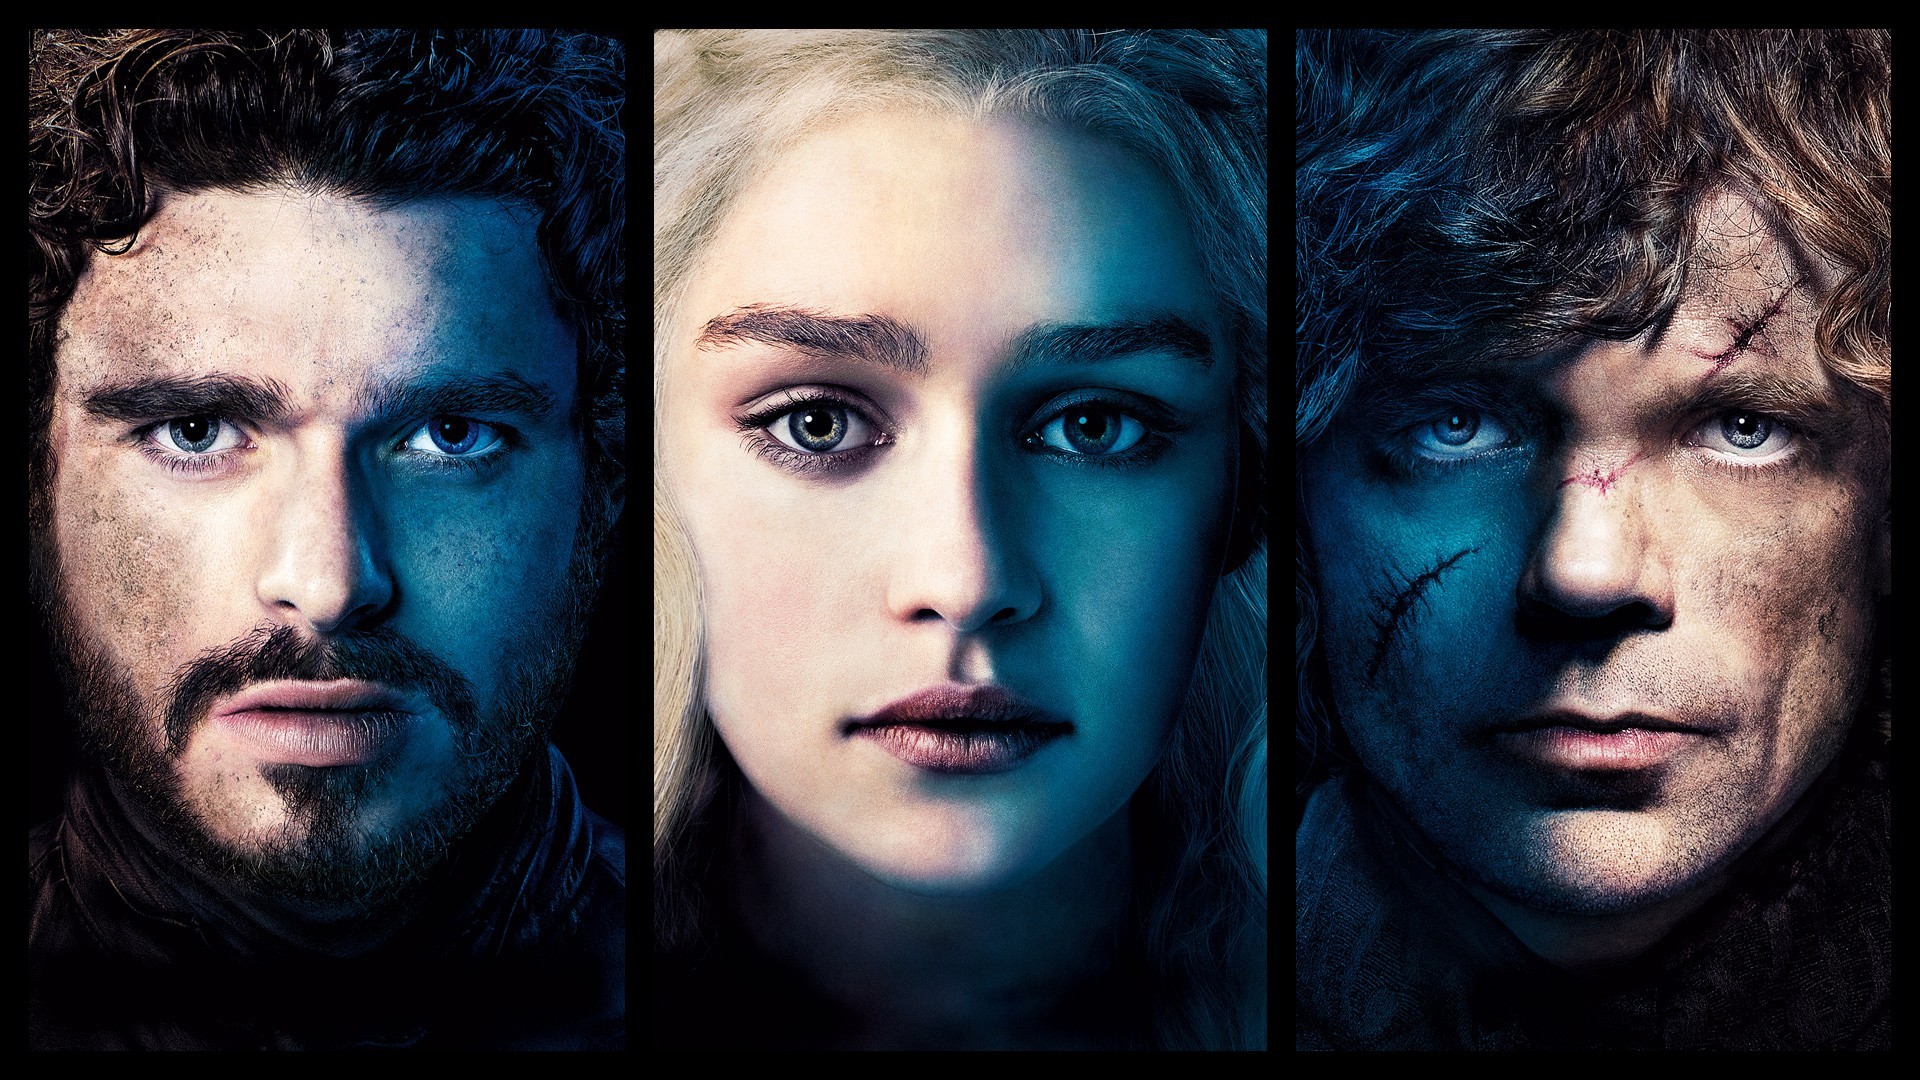 1920x1080 A Song Of Ice And Fire Storm Swords Daenerys Targaryen Game Thrones Gt Robb  Stark Tyrion Lannister Westeros